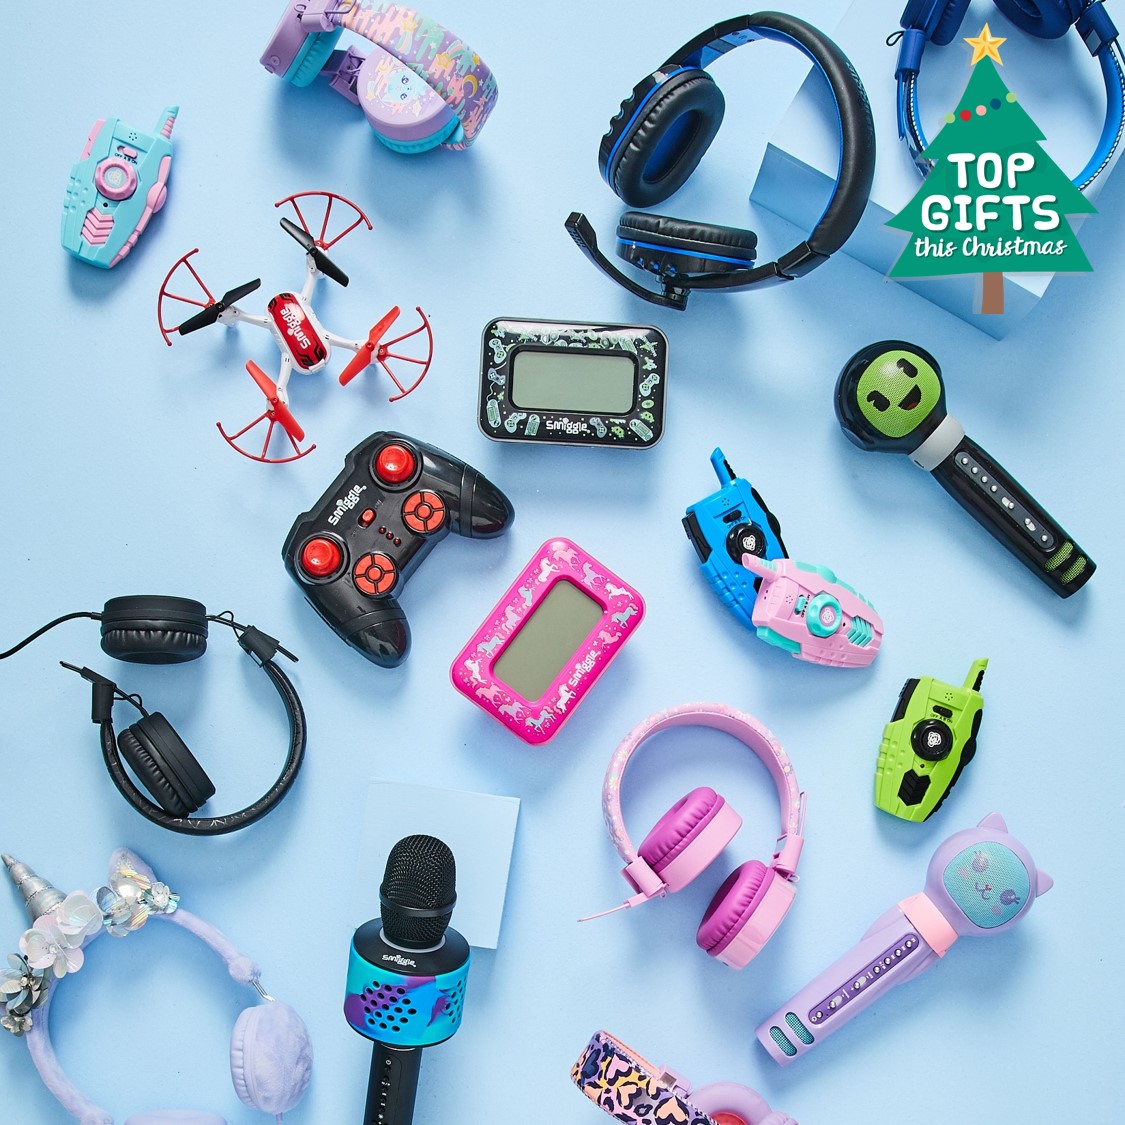 Shop the top tech gifts this Christmas! 🎅🎧 clocks, drones, walkie talkies, headphones and more, we have your gifting covered. 